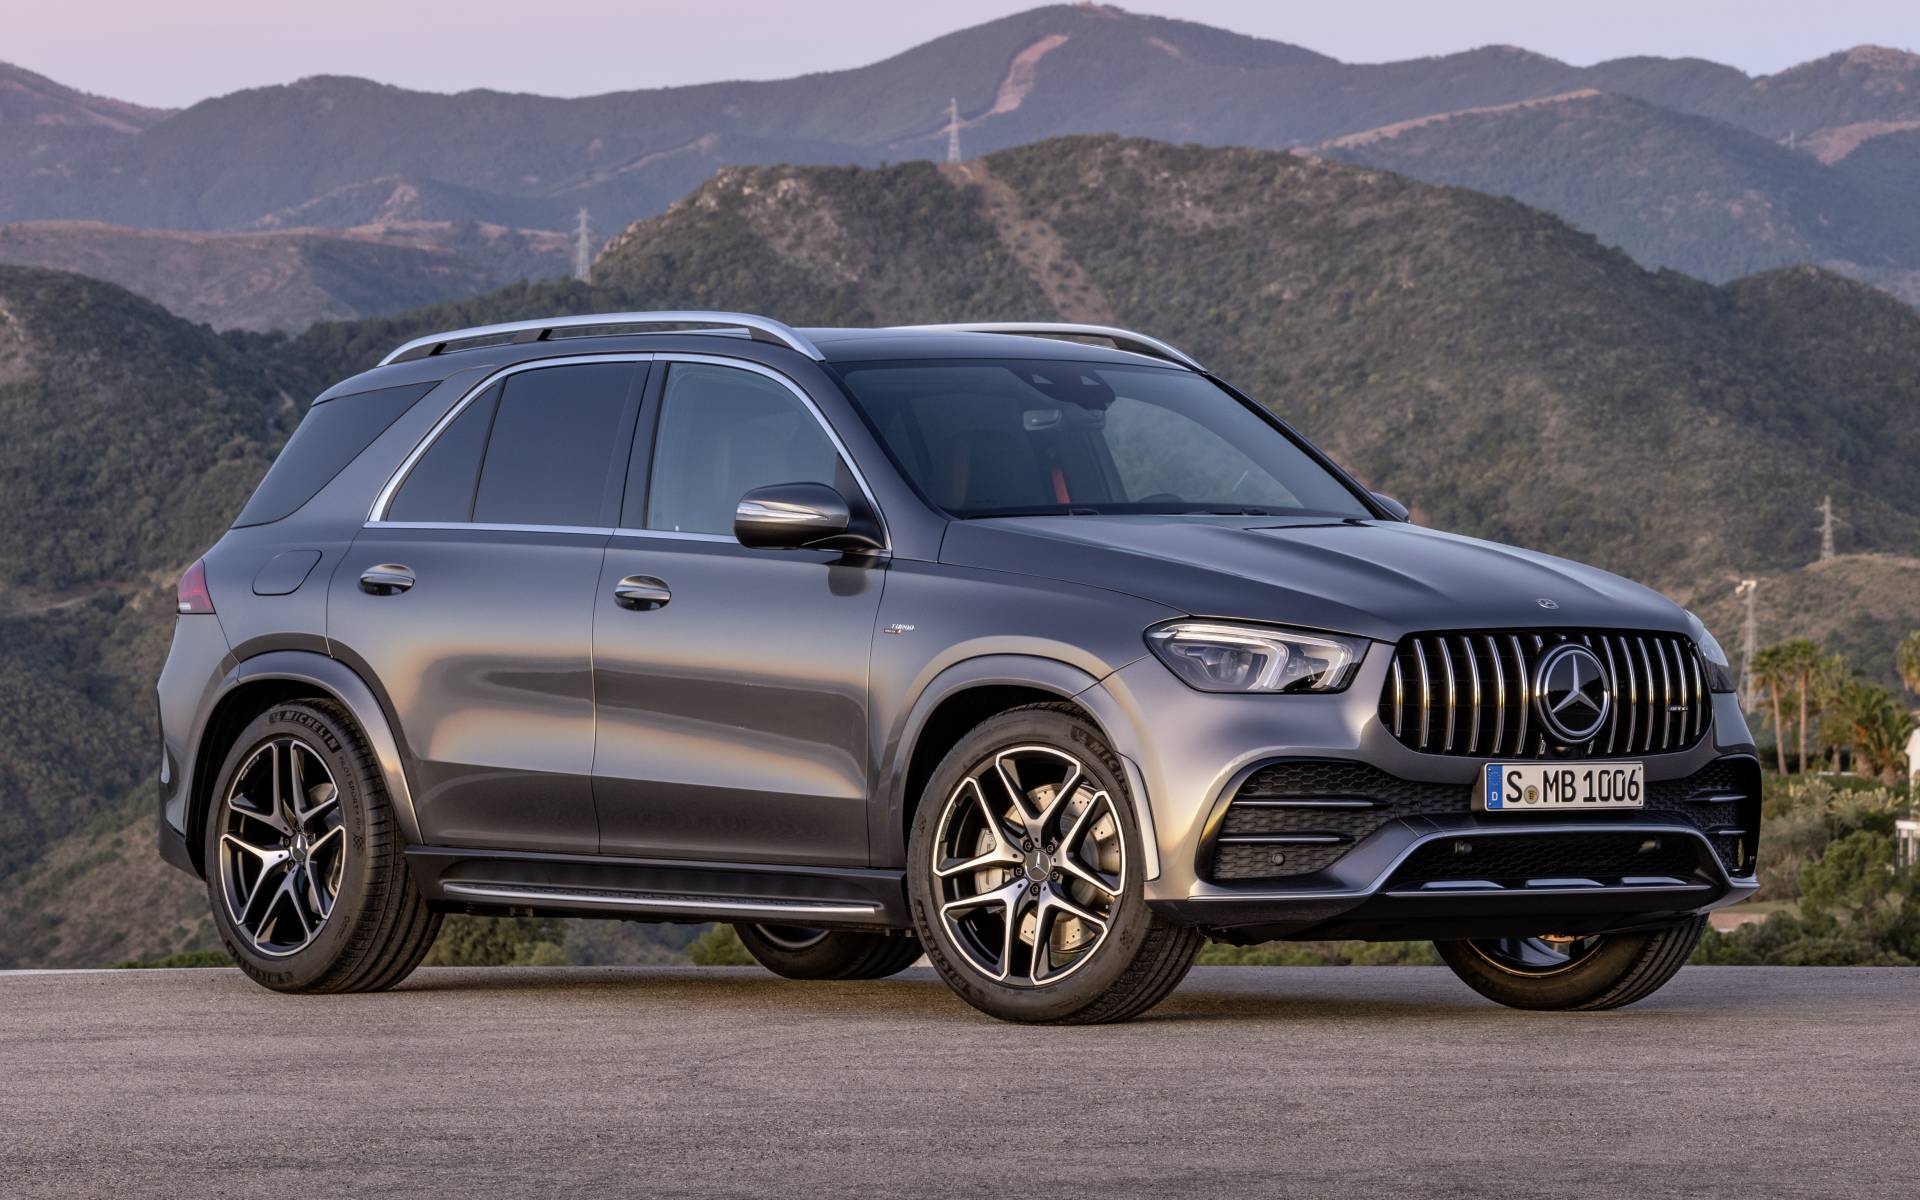 2020 Mercedes Benz Gle Gle 350 4matic Specifications The